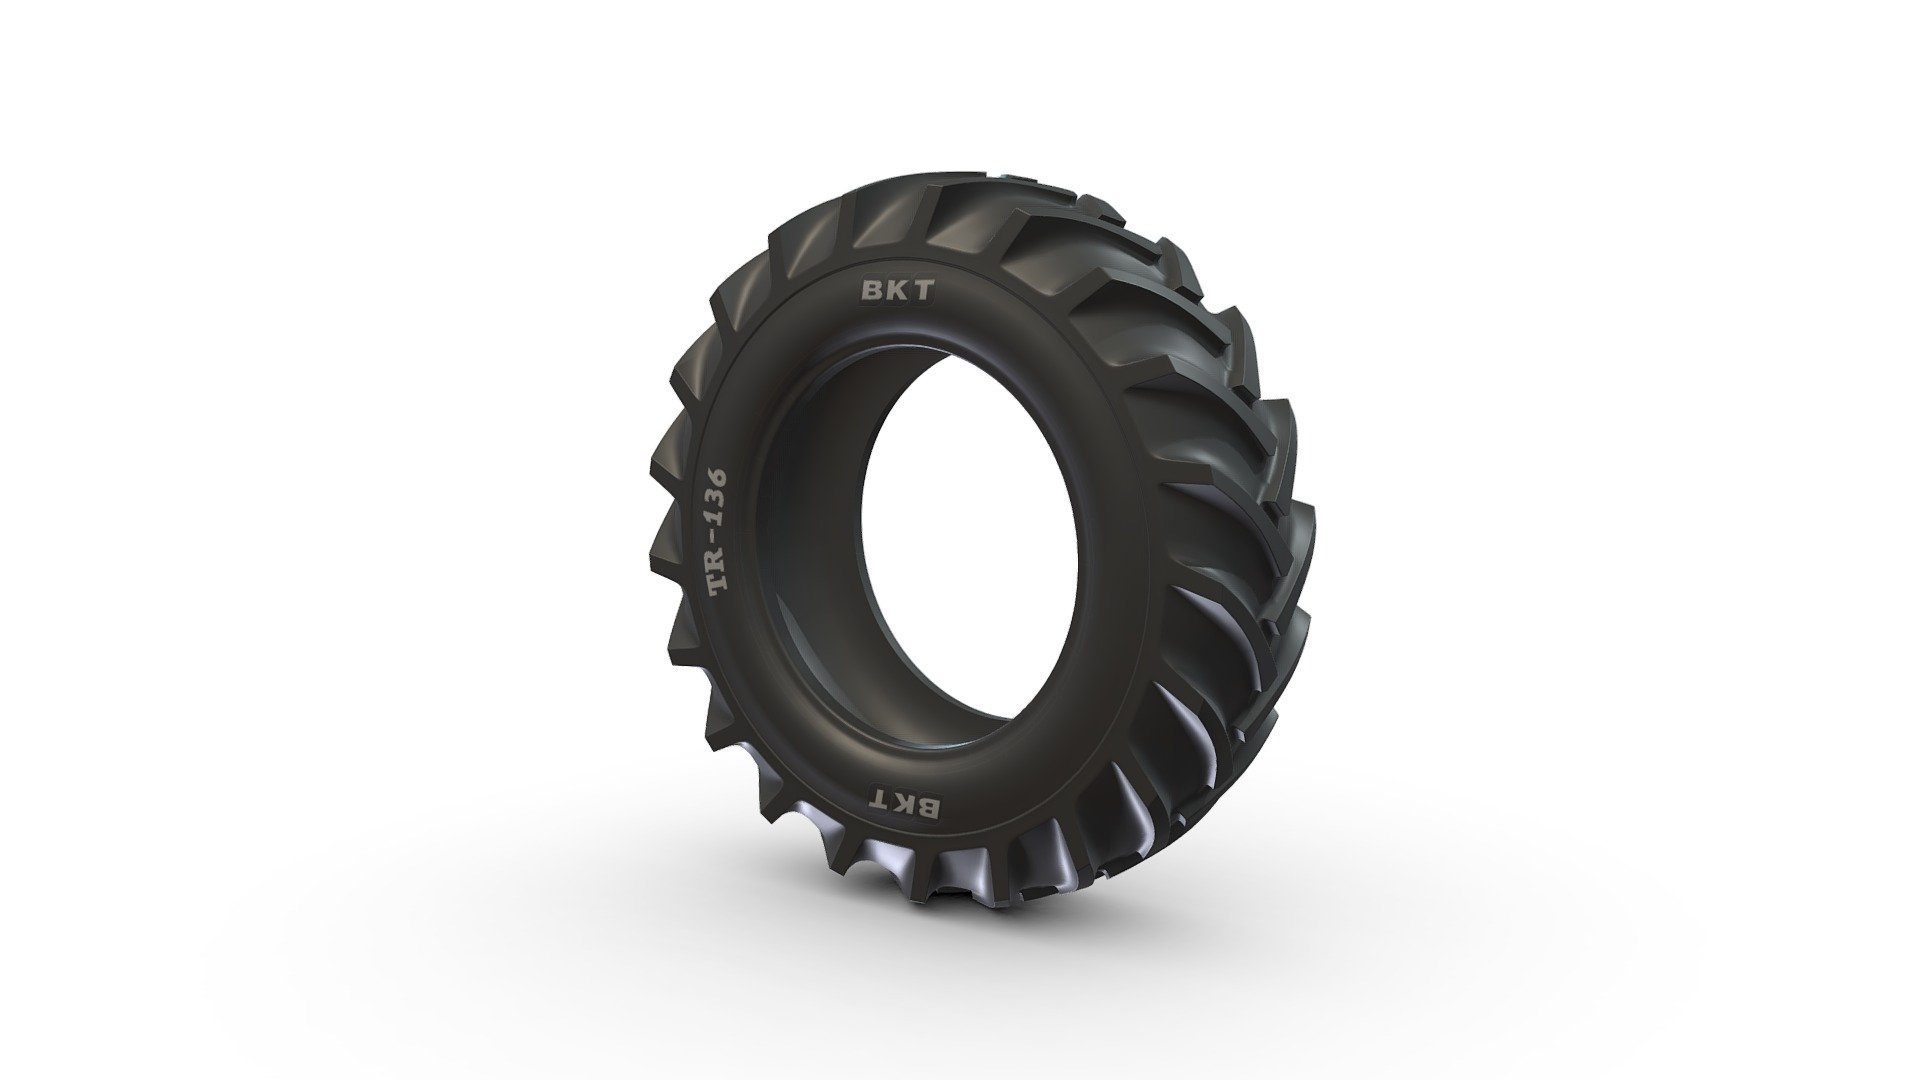 TR 136 has been developed by BKT to equip tractors and trailers in soil tillage and haulage operations. This tire provides improved traction in all working conditions along with best cut and chip resistance to reduce machine downtime and increase your productivity. Thanks to the increased number of lugs, TR 136 provides outstanding traction even at high loads 3d model